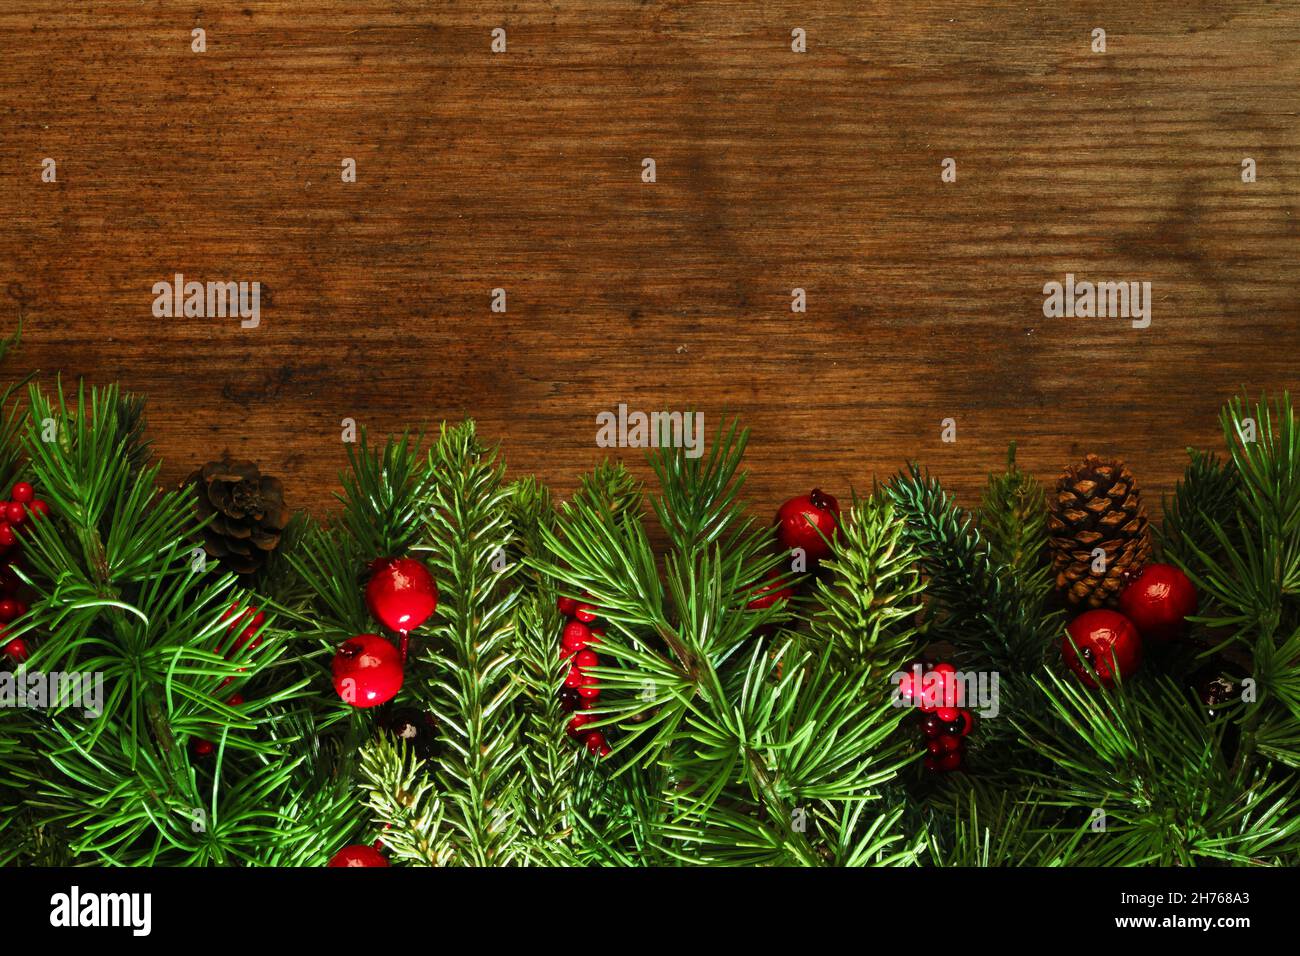 Christmas tree branches background Stock Photo